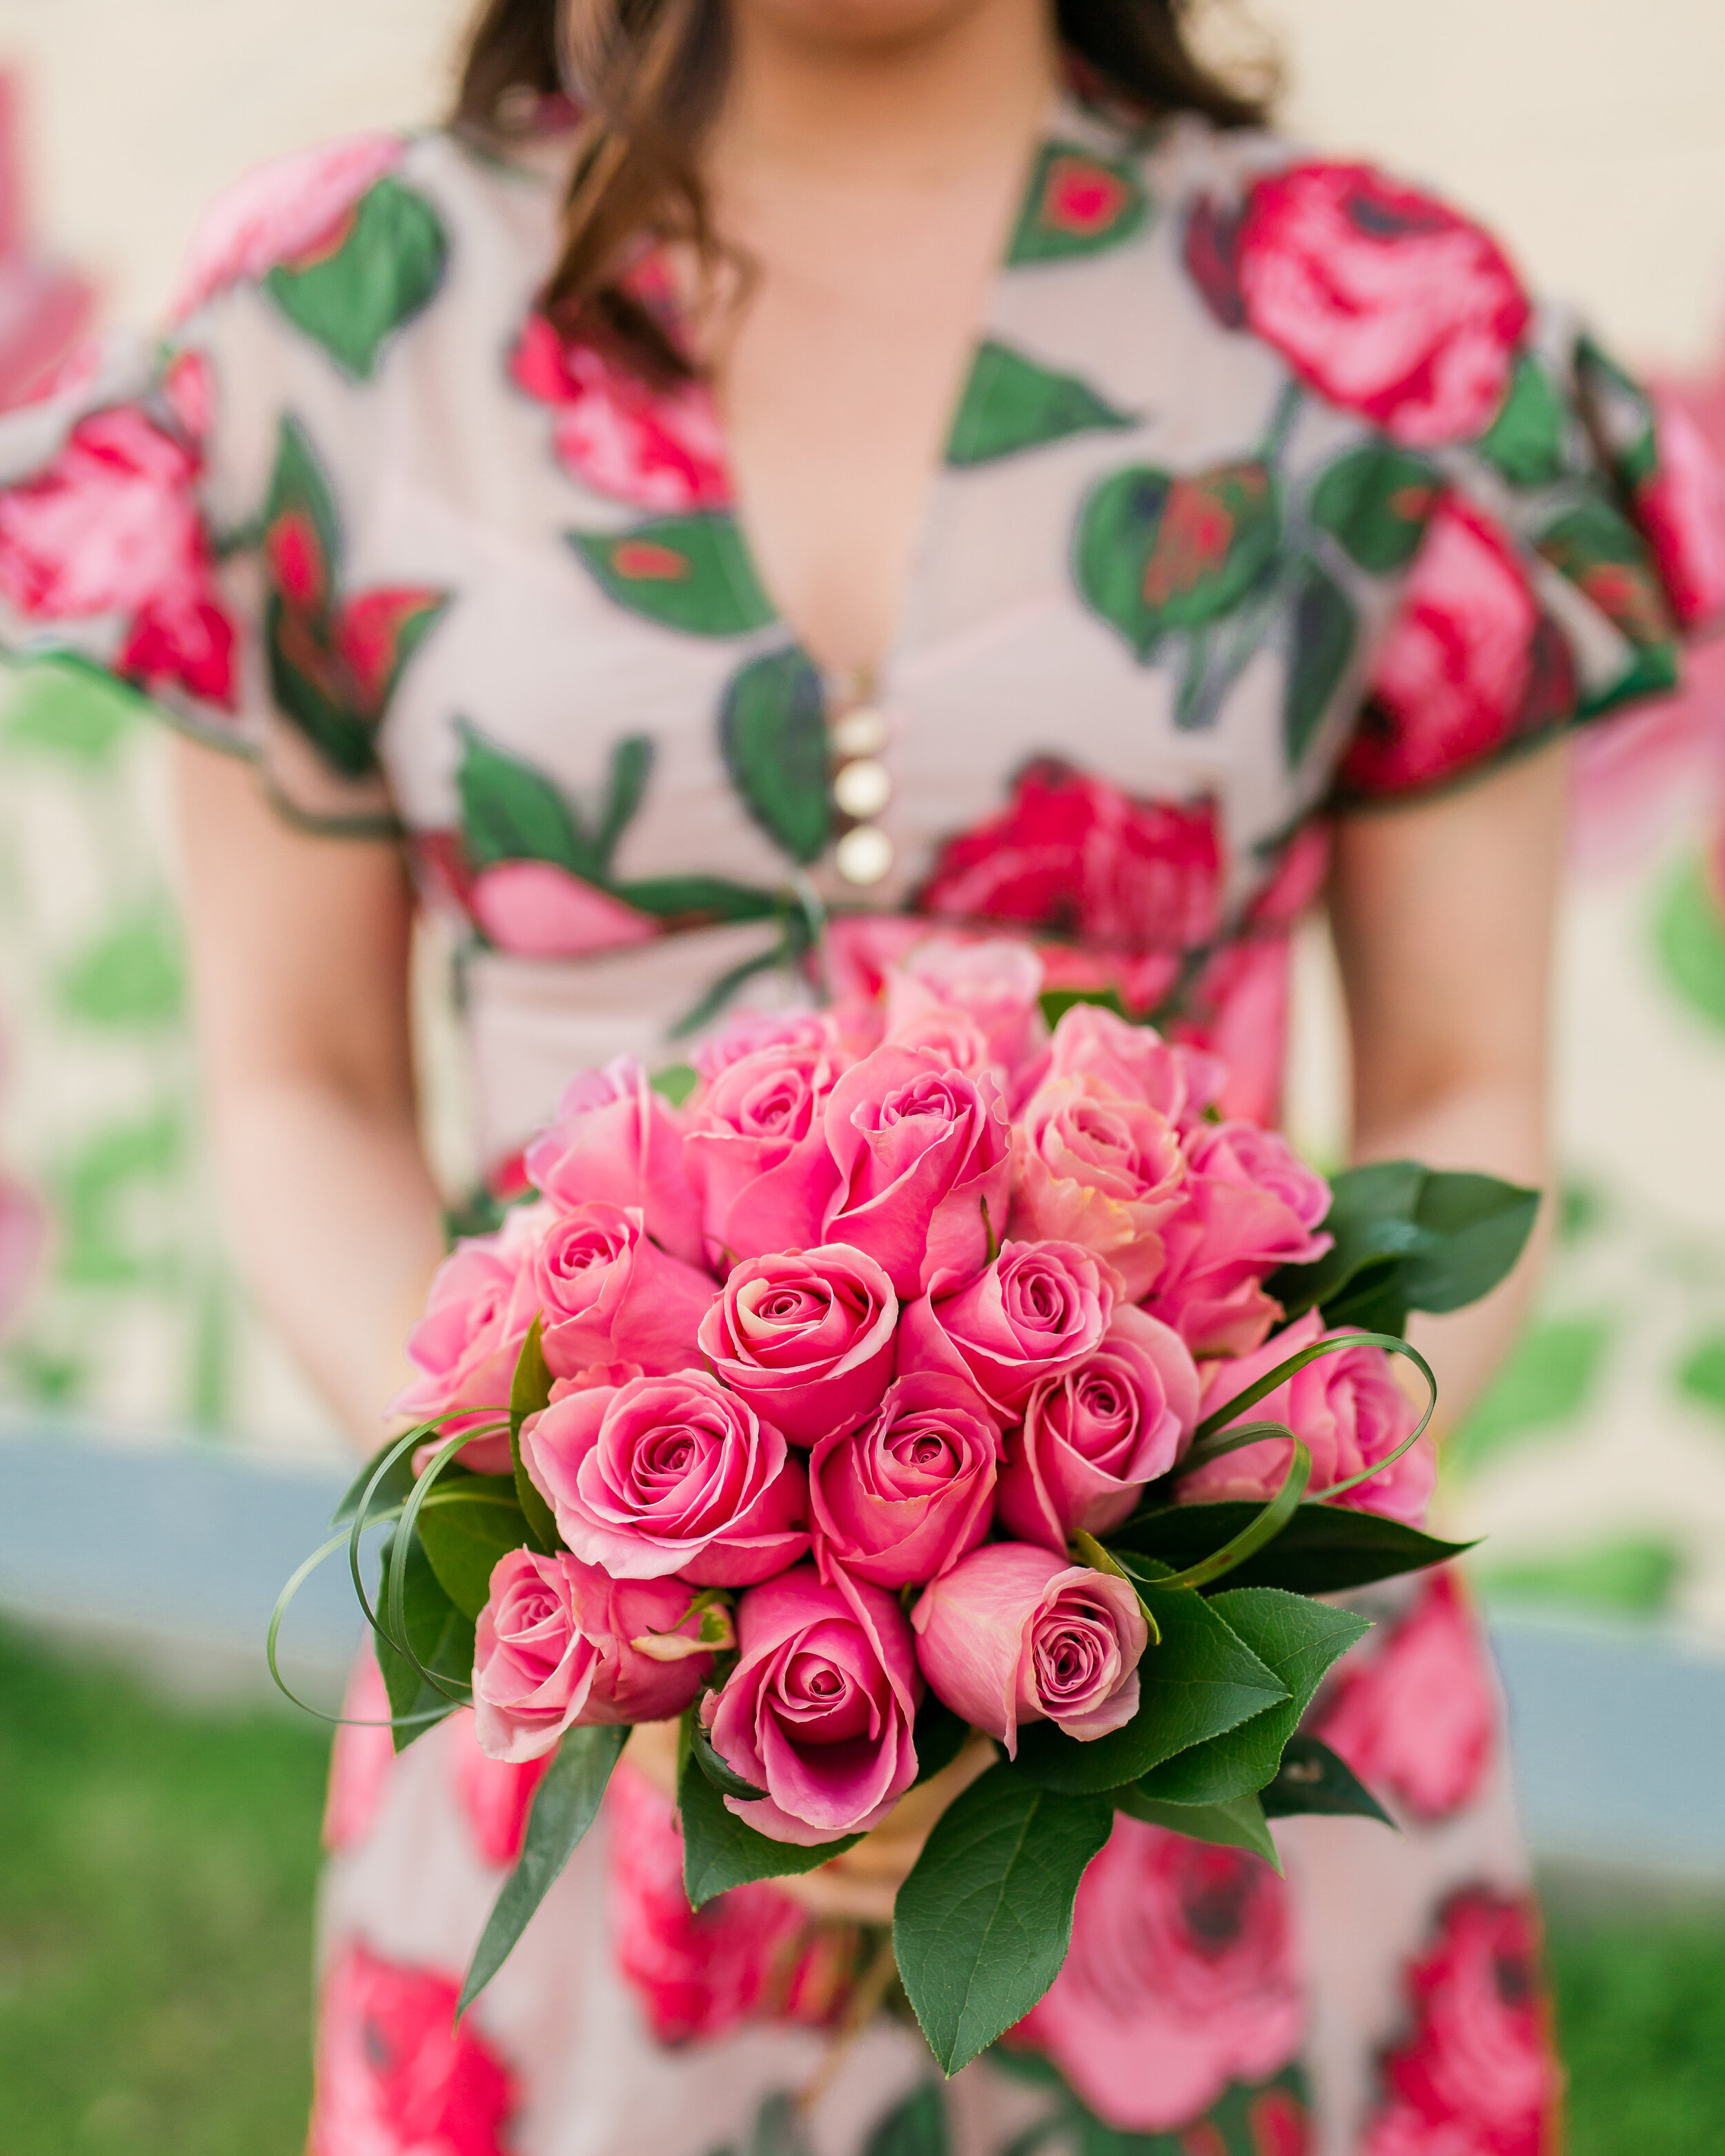 ChristinaBestPhotography_Dressed_to_Match_Michelle_roses-7.jpg